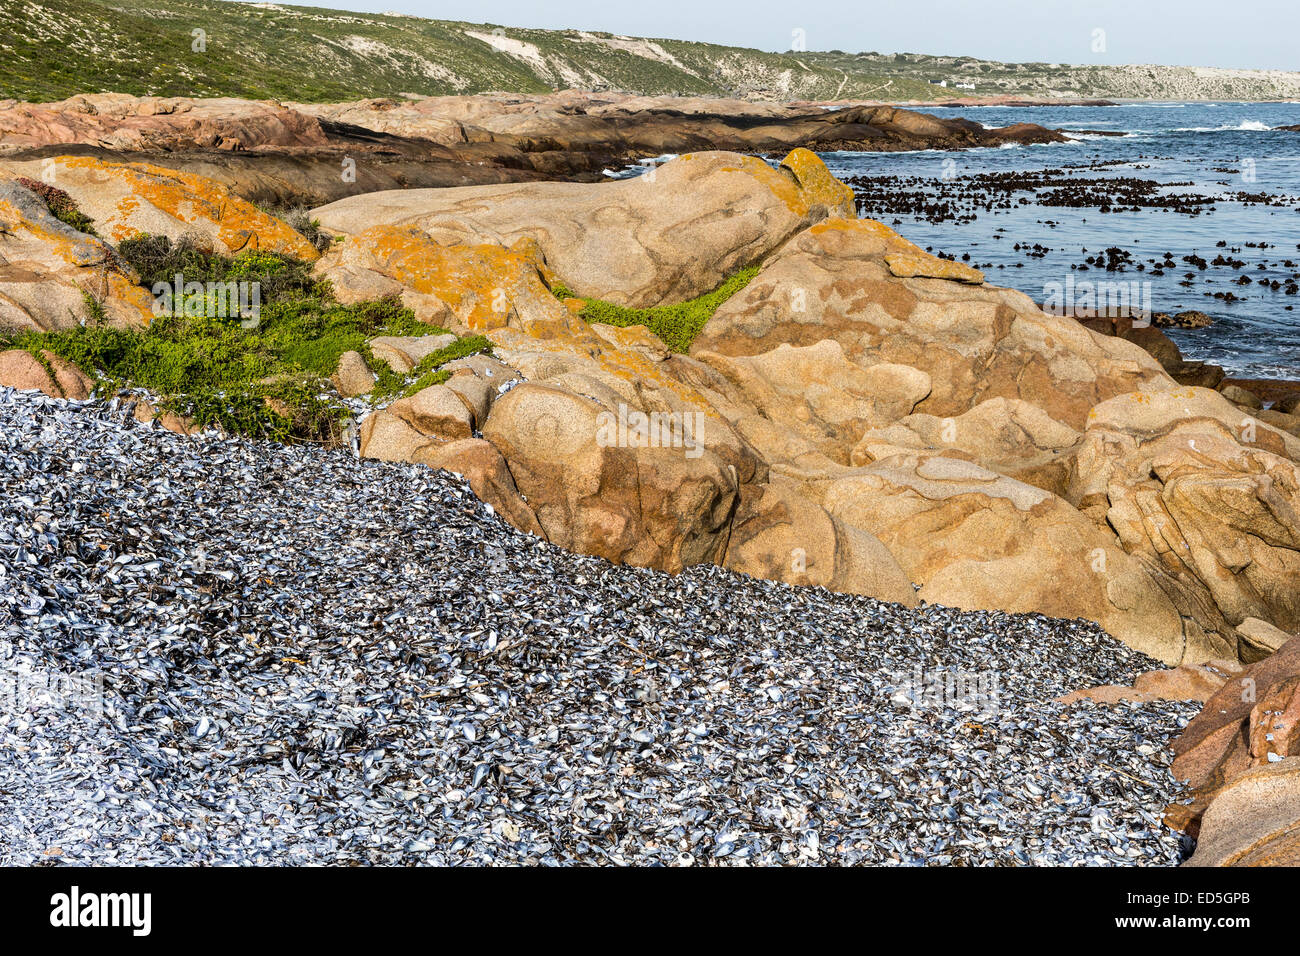 White Mussels shells, Columbine Nature Reserve, Paternoster, Western Cape, South Africa Stock Photo